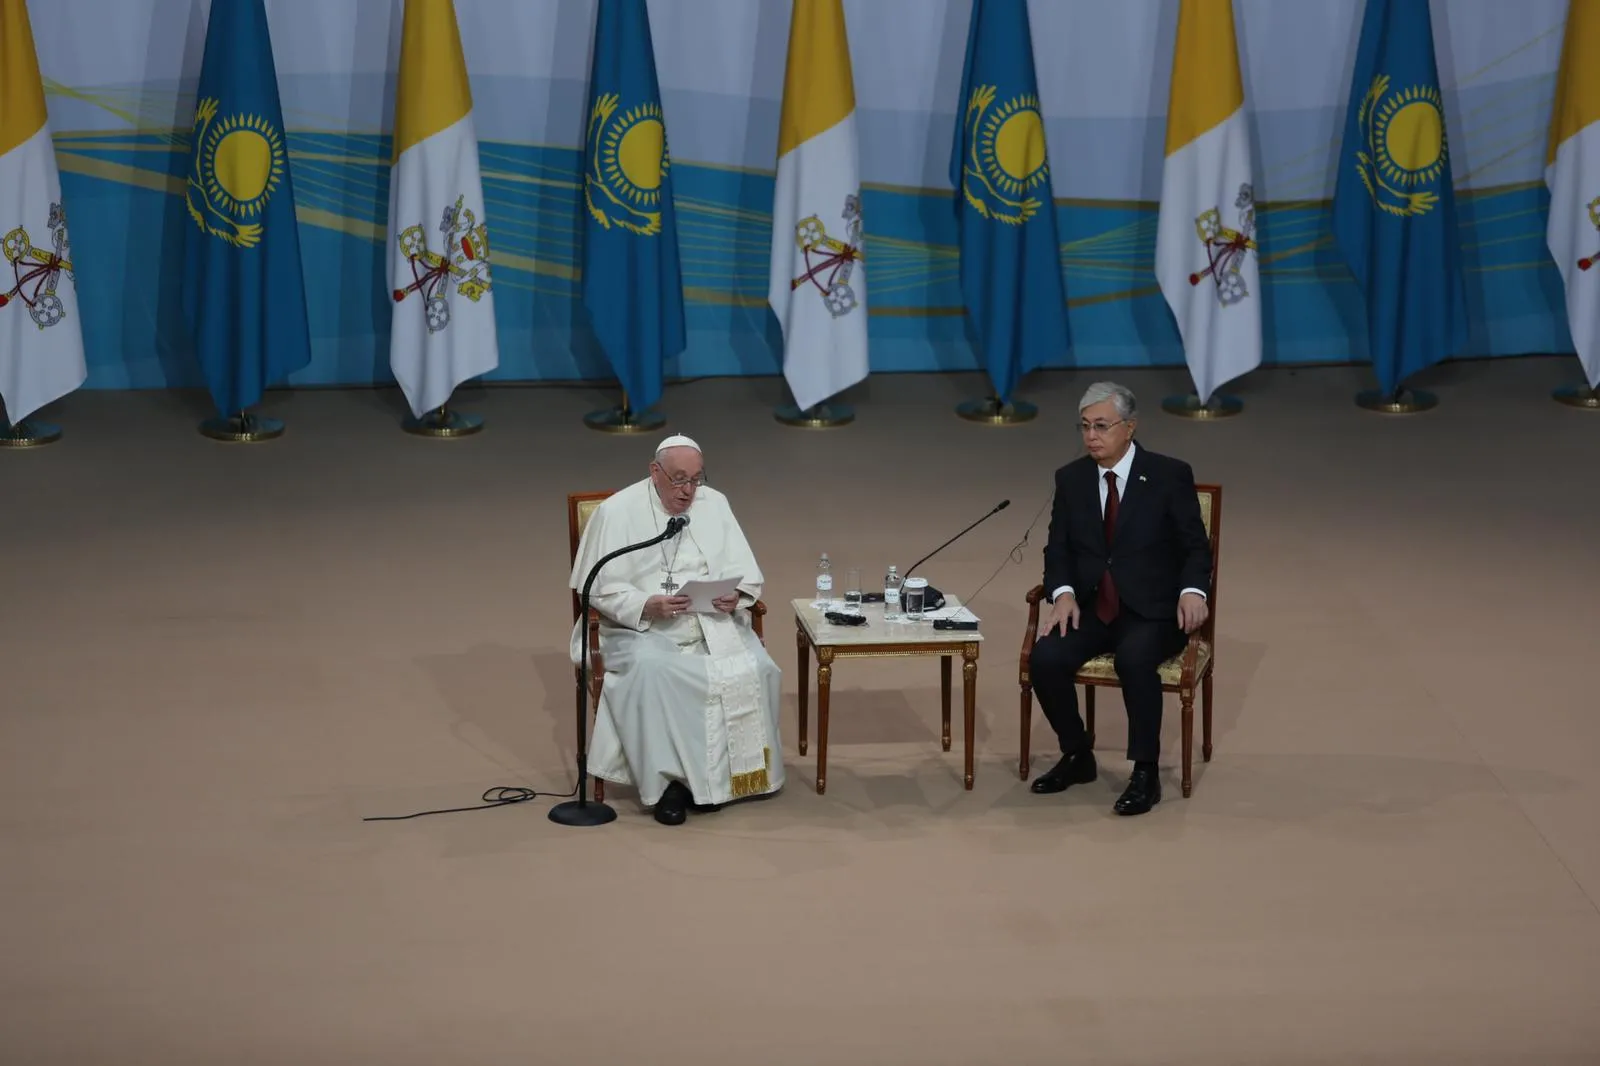 Pope Francis speaks from the stage of the Qazaq Concert Hall in Nur-Sultan, Kazakhstan, Sept 13. 2022. Also onstage is Kazakhstan President Kassym-Jomart Tokayev.?w=200&h=150